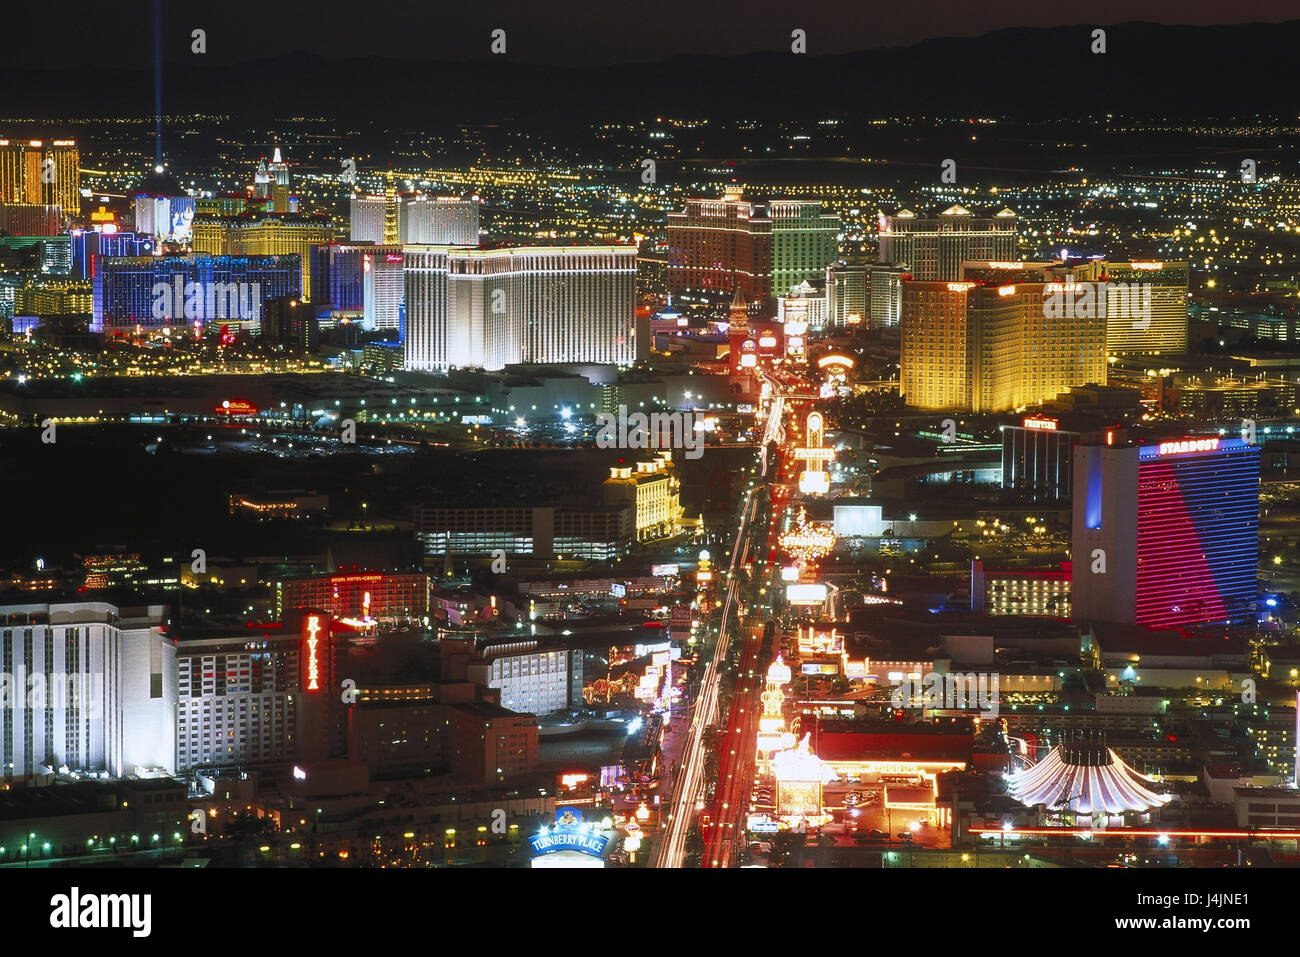 The USA, Nevada, Las Vegas, the Strip, town overview, night, illuminateded  America, town, overview, player's town, Las Vegas Strip, Las Vegas  boulevard, illuminateds, Illumination, illuminated, pleasure mile, houses,  high rises, hotels, casinos,